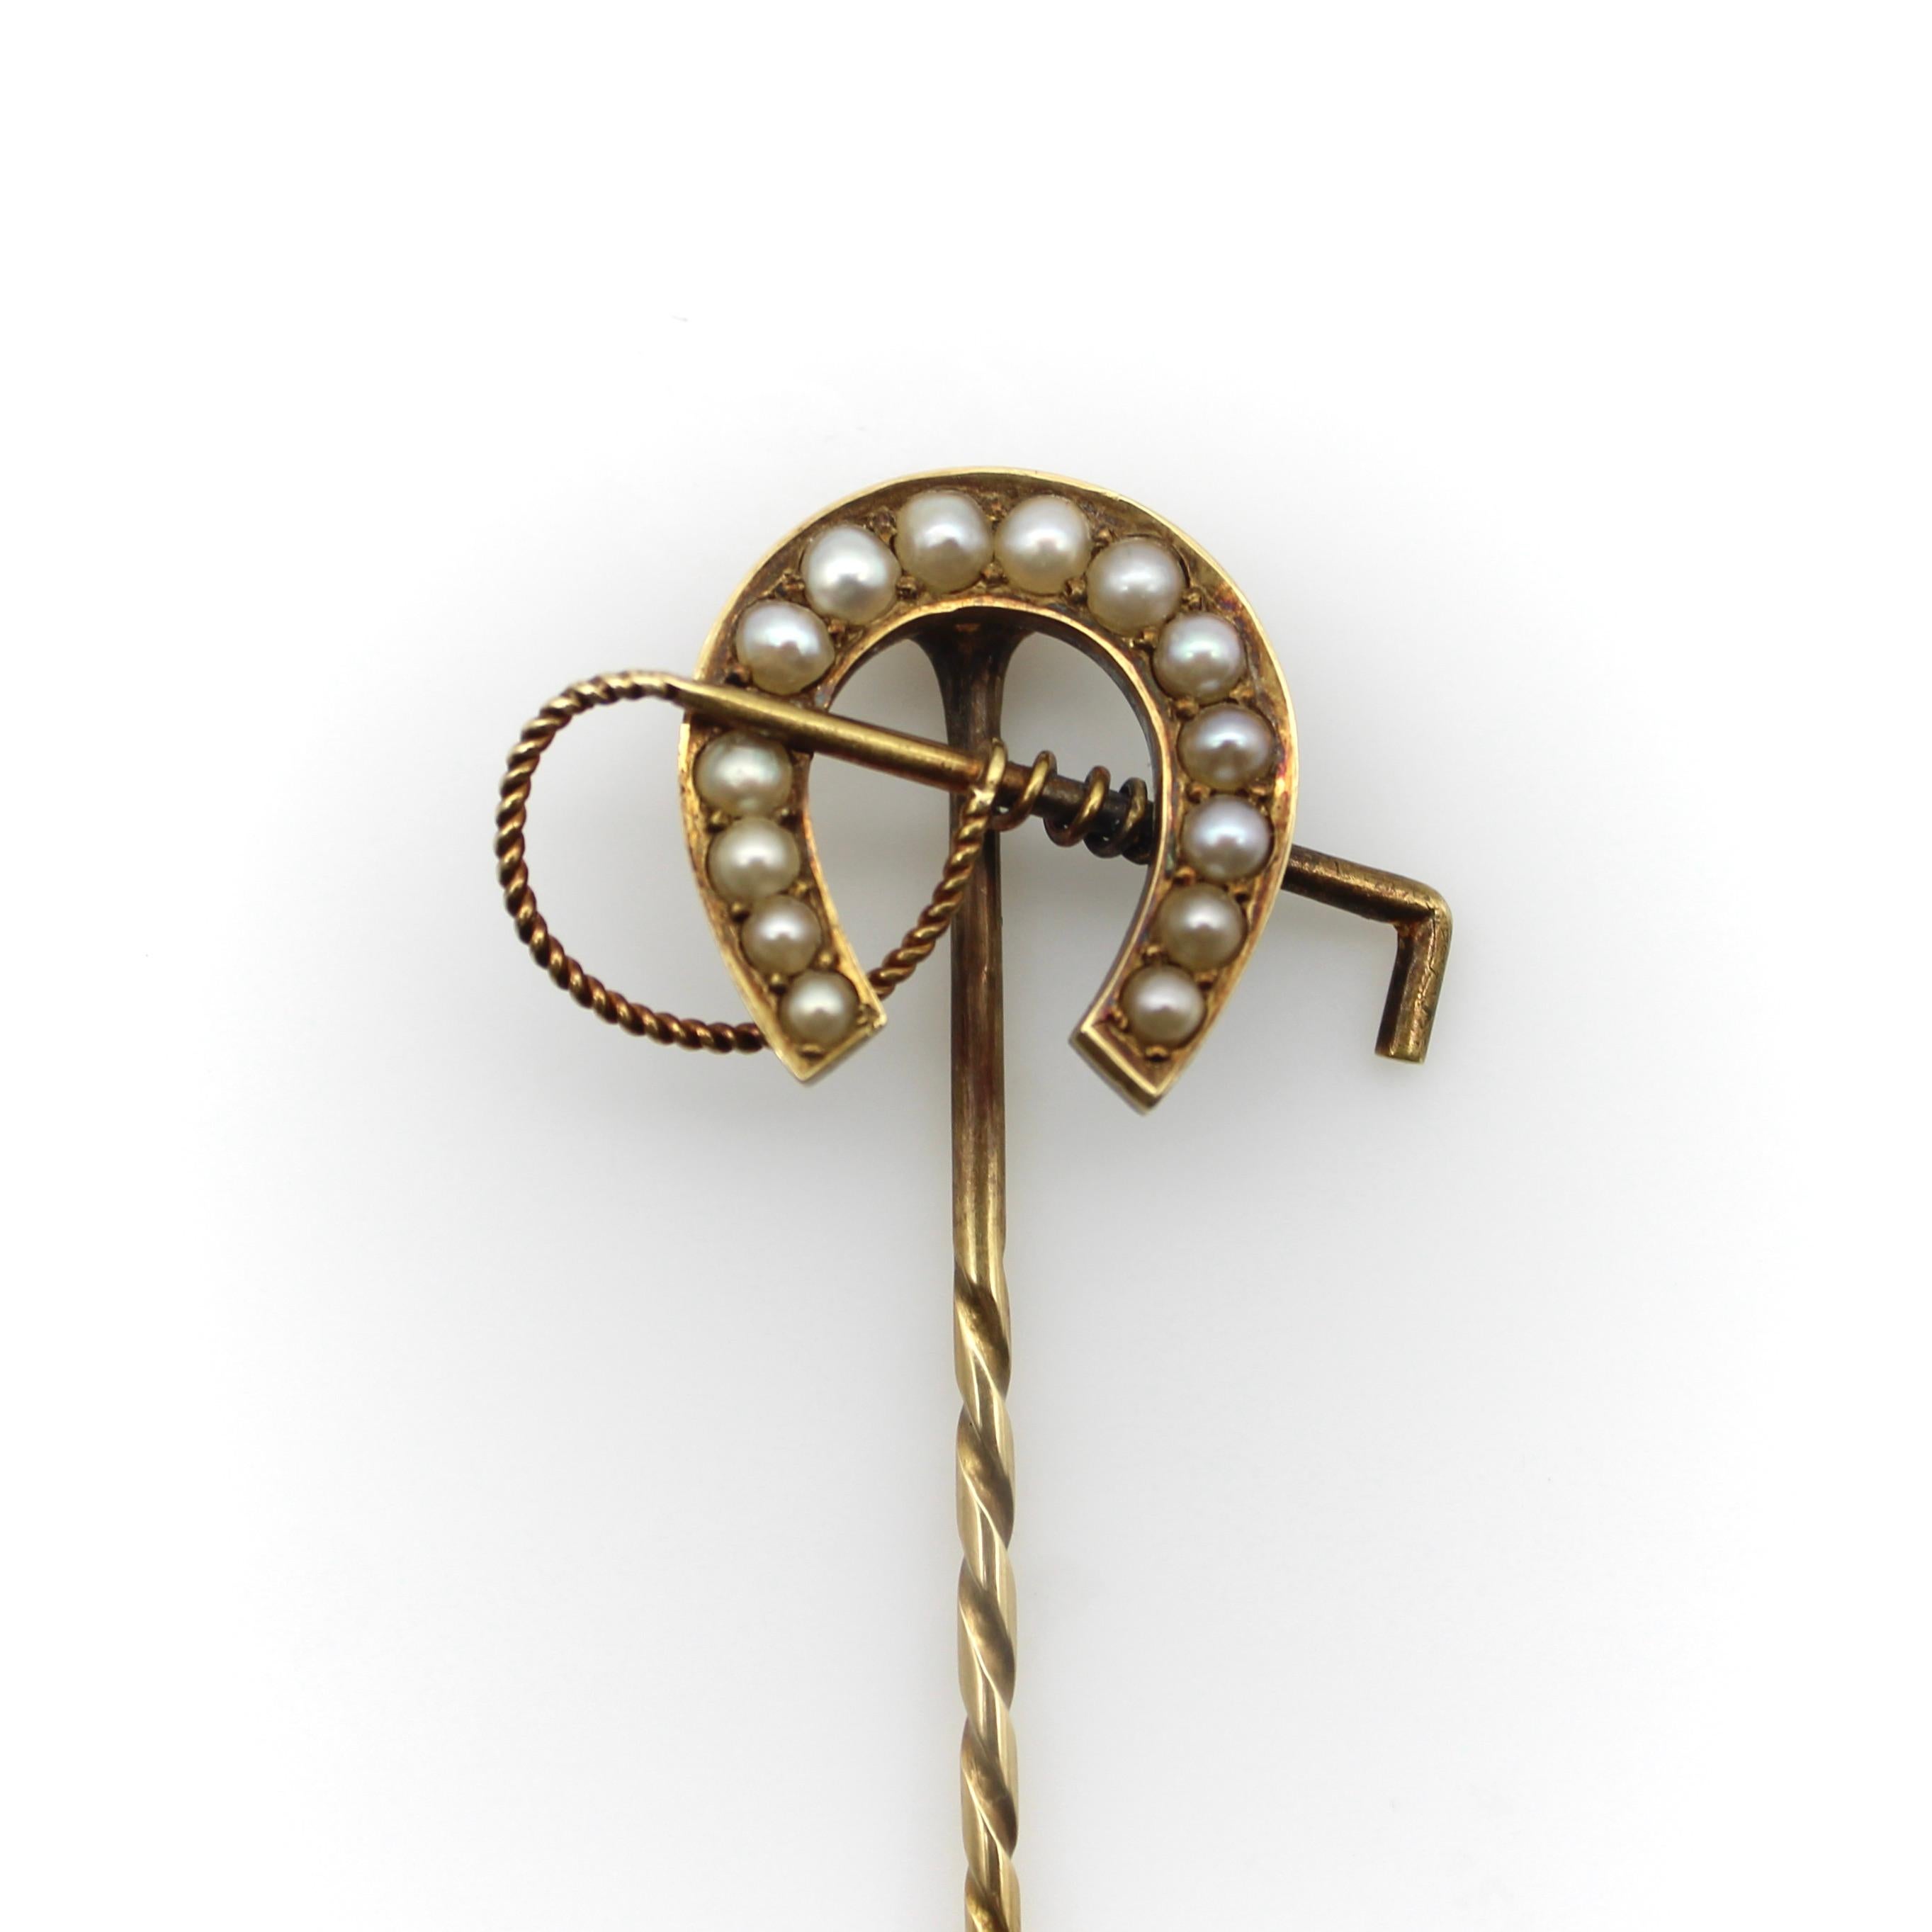 This elaborate Edwardian 15 karat yellow gold decorative stick pin features a horseshoe and riding whip. The good-luck horseshoe has 14 pearls that fit nicely inside of it, as if to add a glimmer of good fortune. Each pearl is approximately between